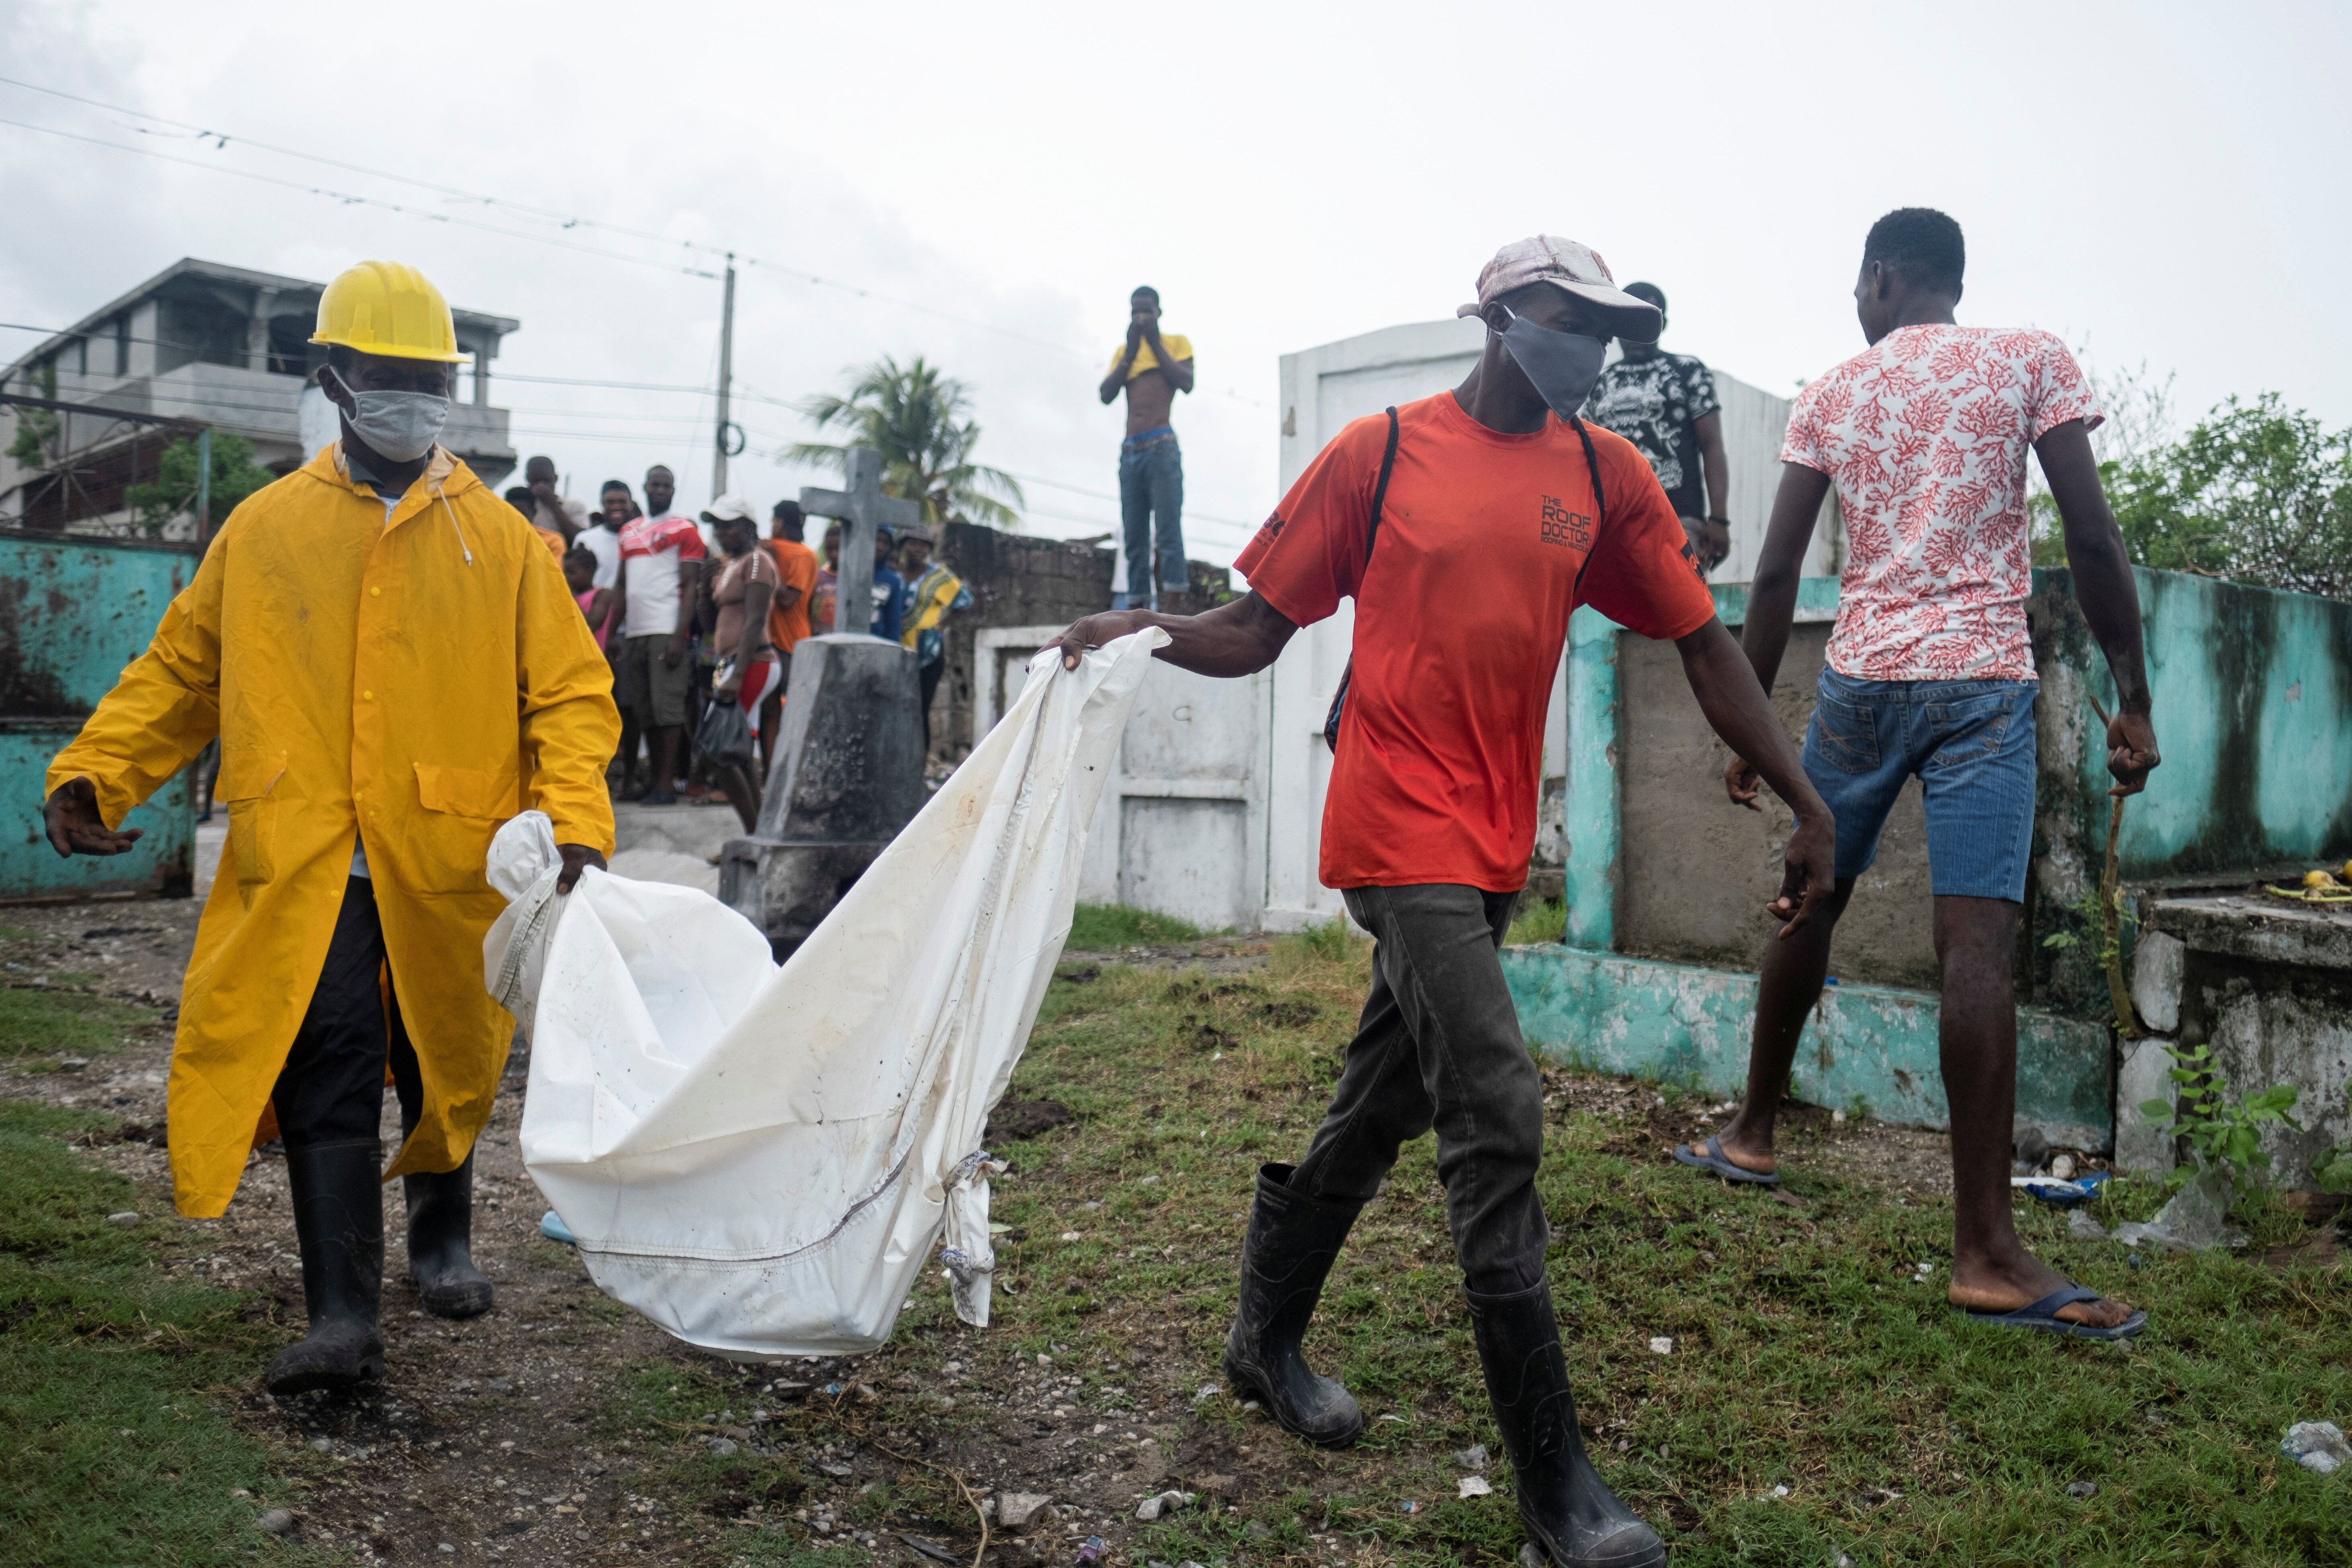 Men in Les Cayes, Haiti carry the body of a victim&nbsp;from Saturday's 7.2 magnitude quake.